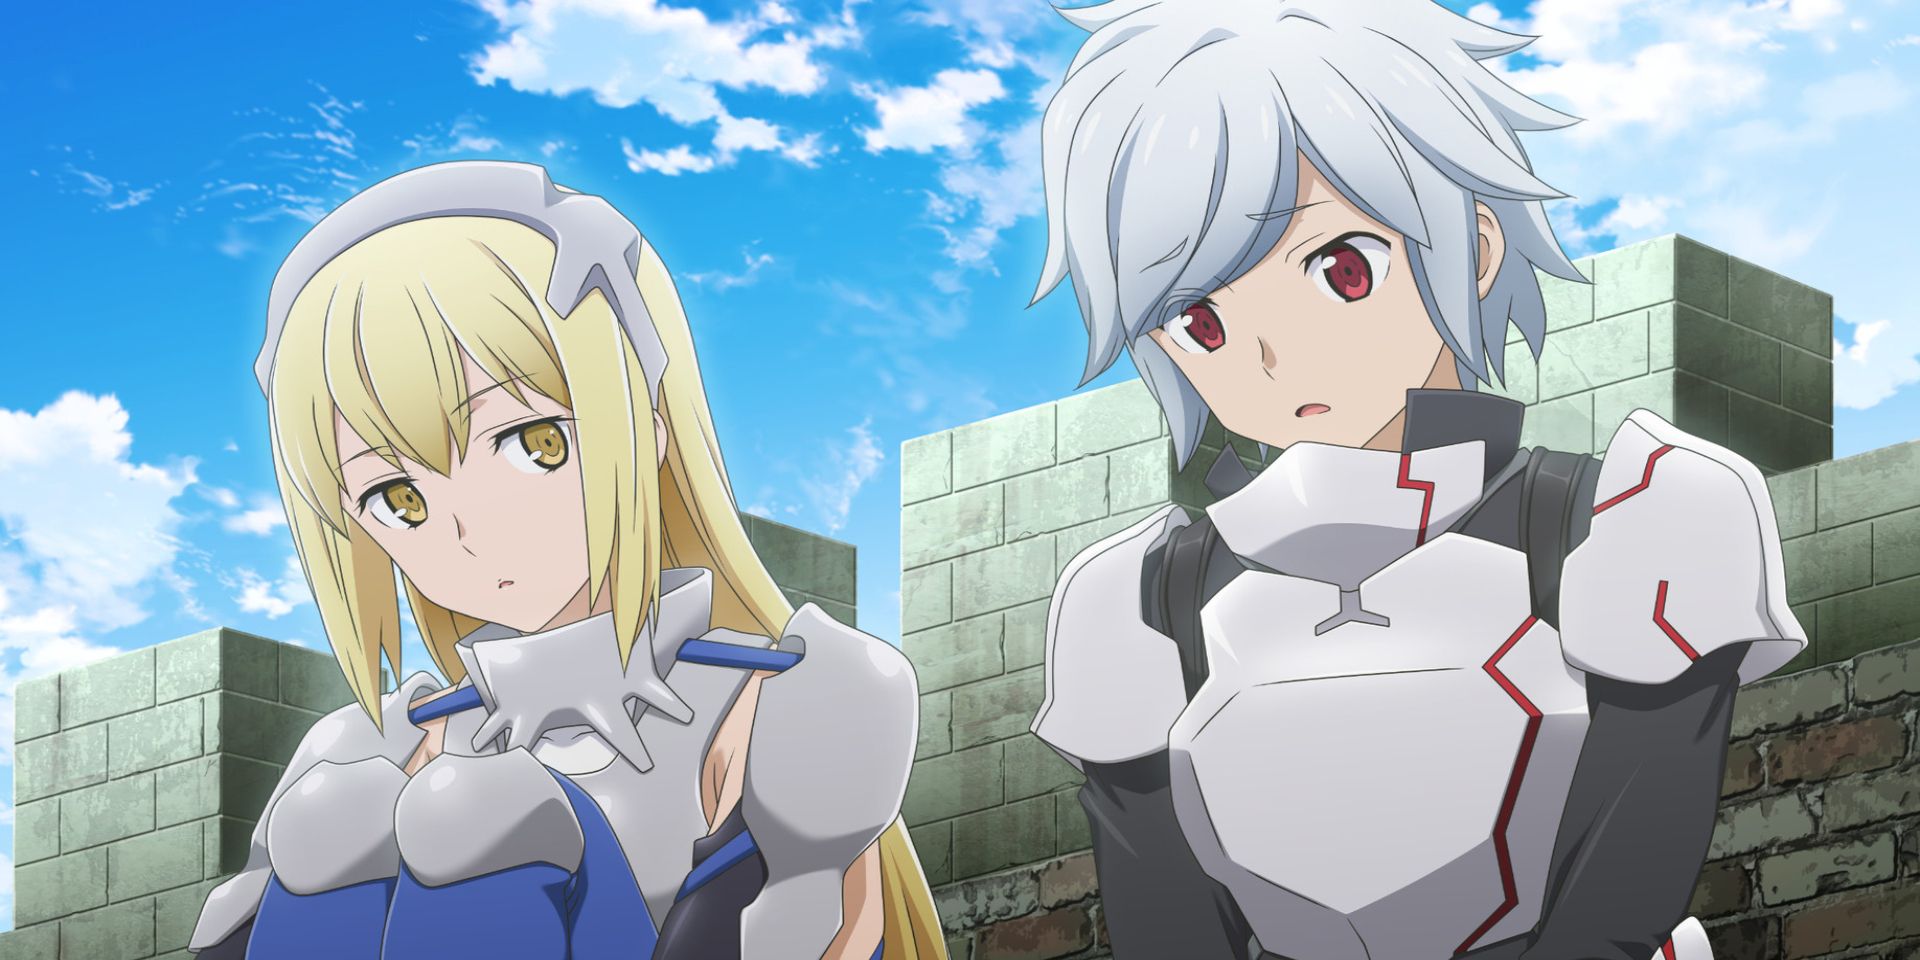 The main characters from the anime series Is It Wrong To Try To Pick Up Girls In A Dungeon.